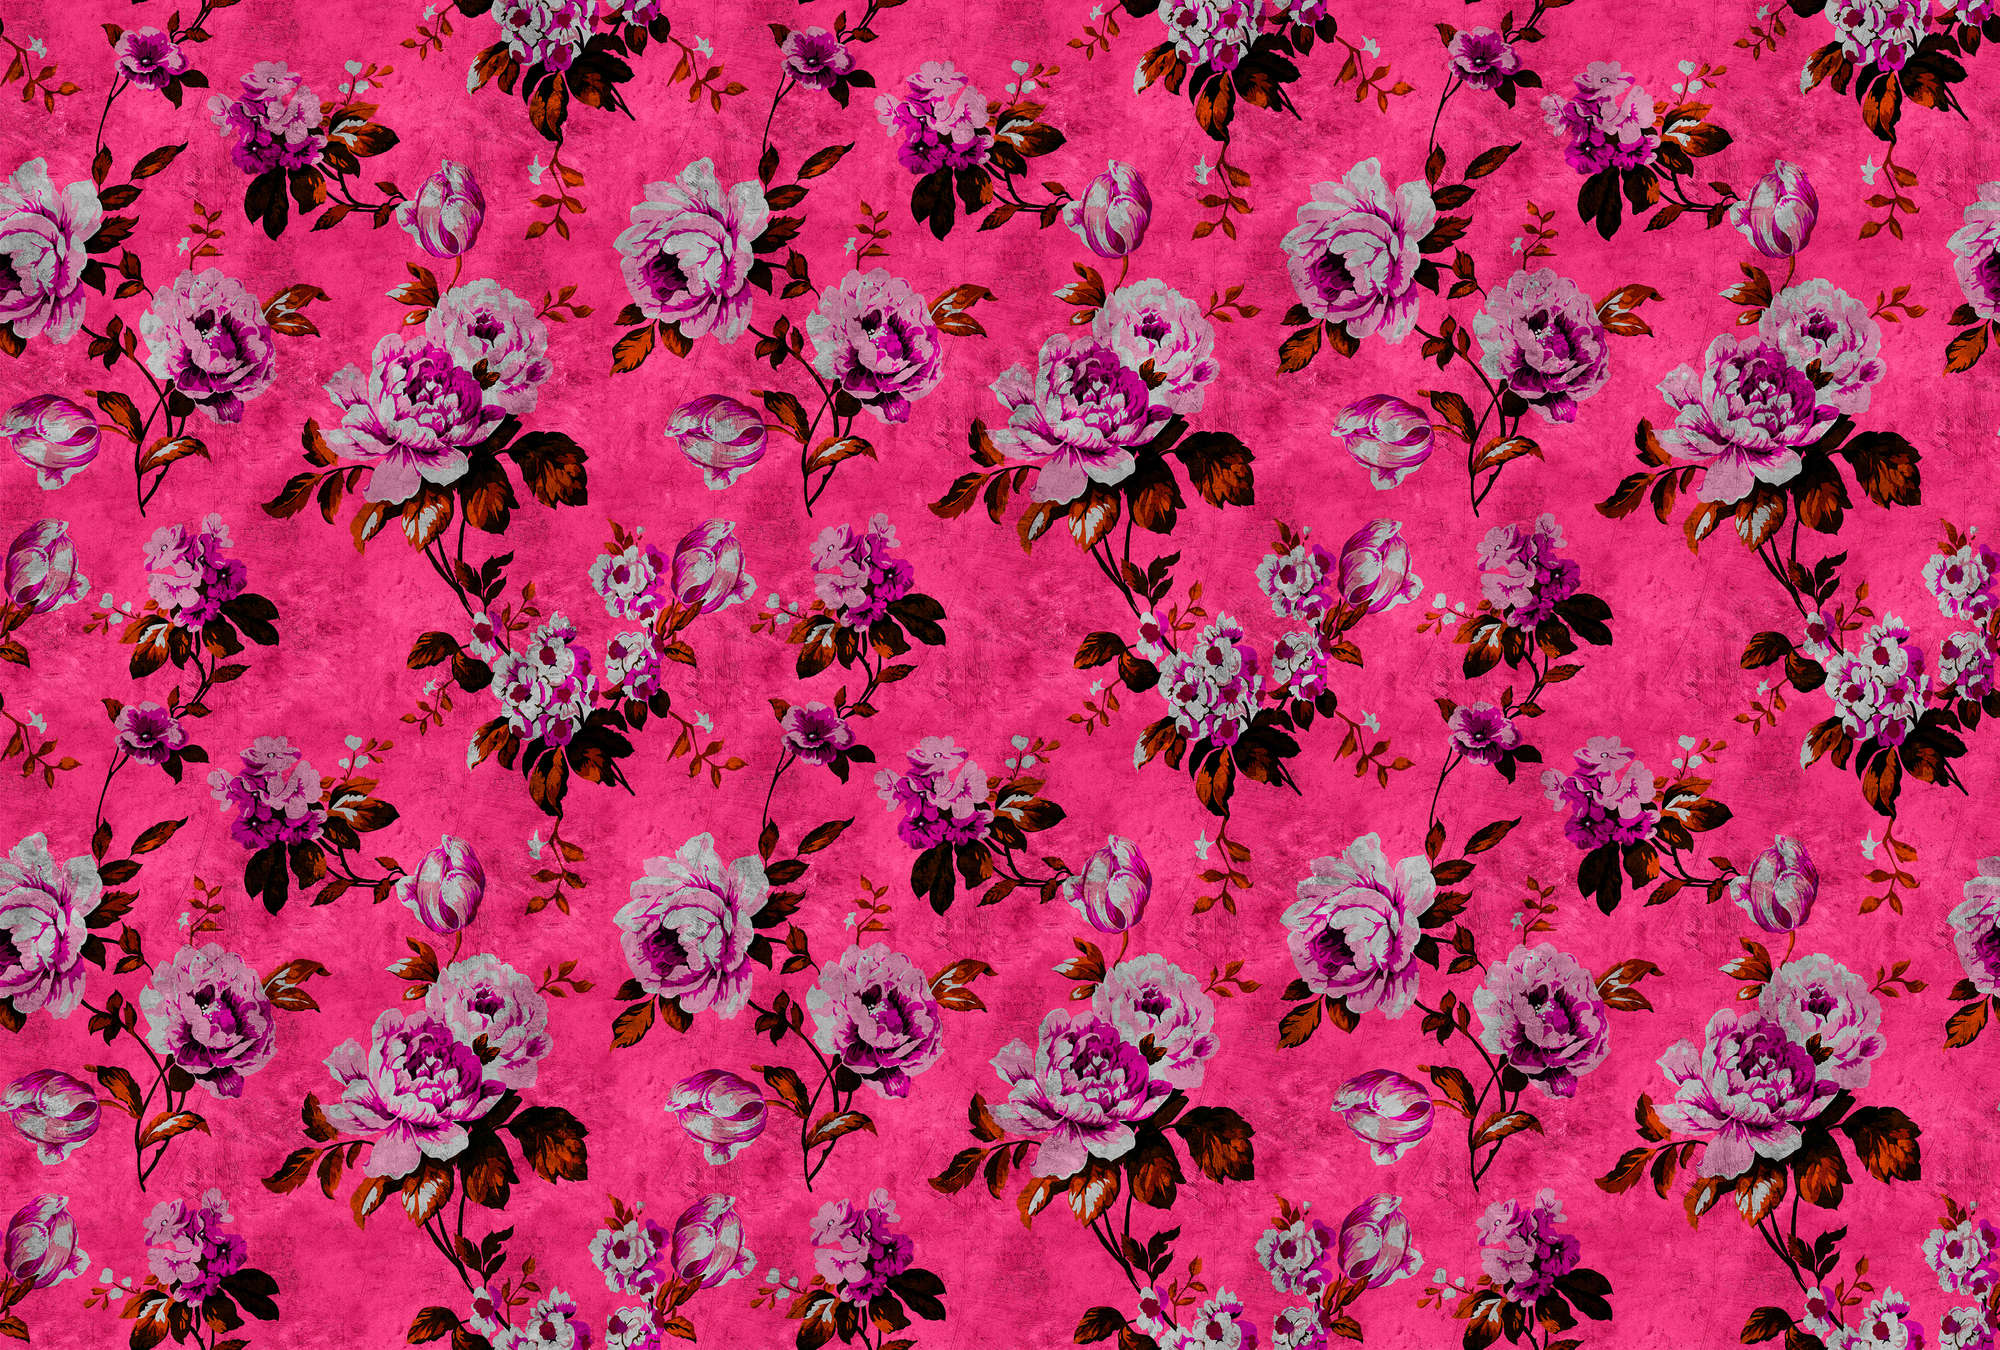             Wild roses 3 - Roses photo wallpaper in retro look, pink- scratch structure - Pink, Red | Matt smooth fleece
        